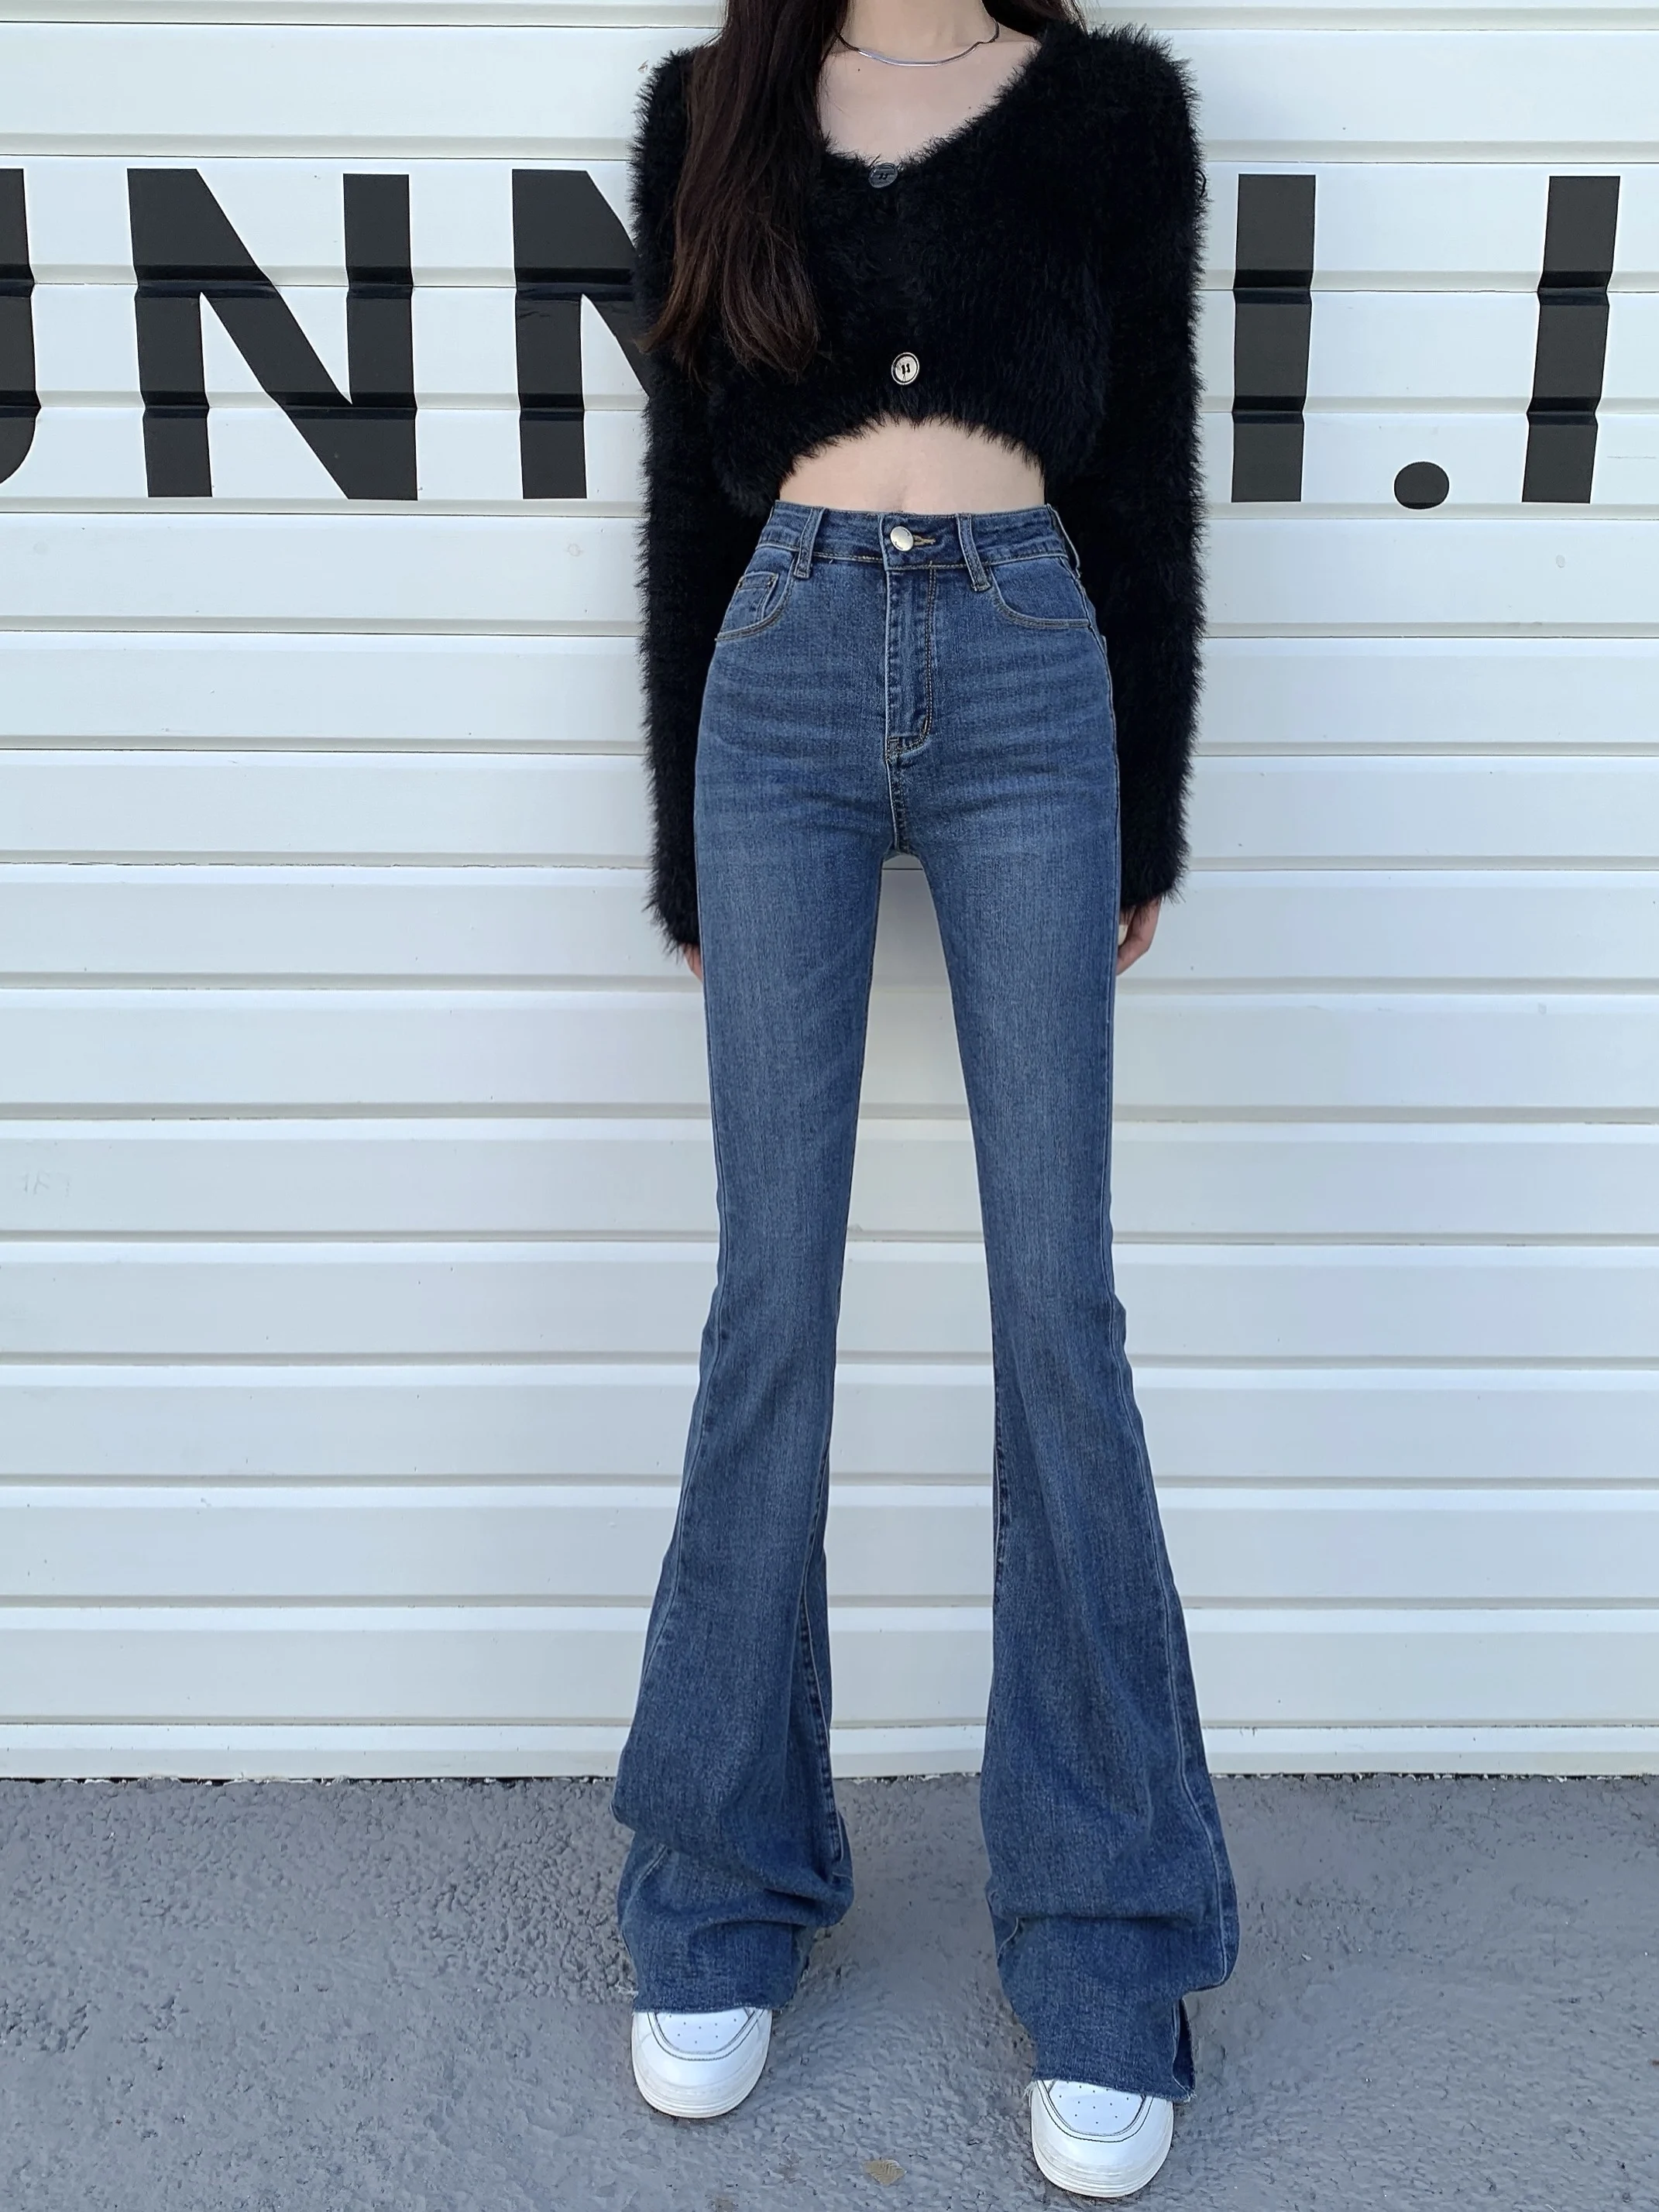 Fit For 160-170cm Height High Waist Leggy Flare Jeans For Women Chic Streetwear Slim Long Boot Cut Denim Pants Lady Jeans